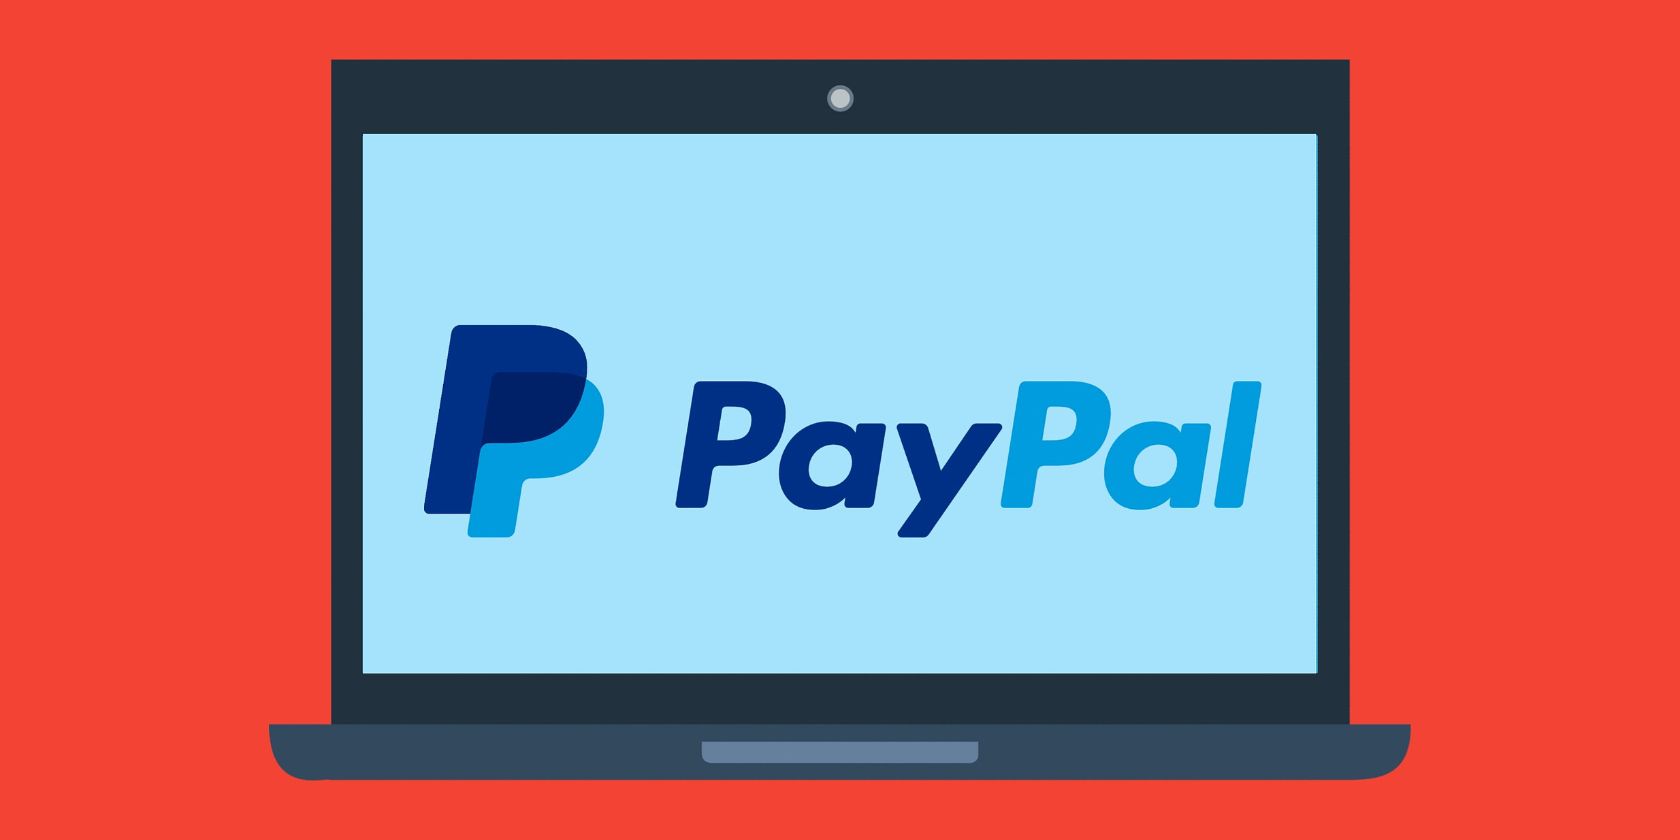 people search websites using paypal